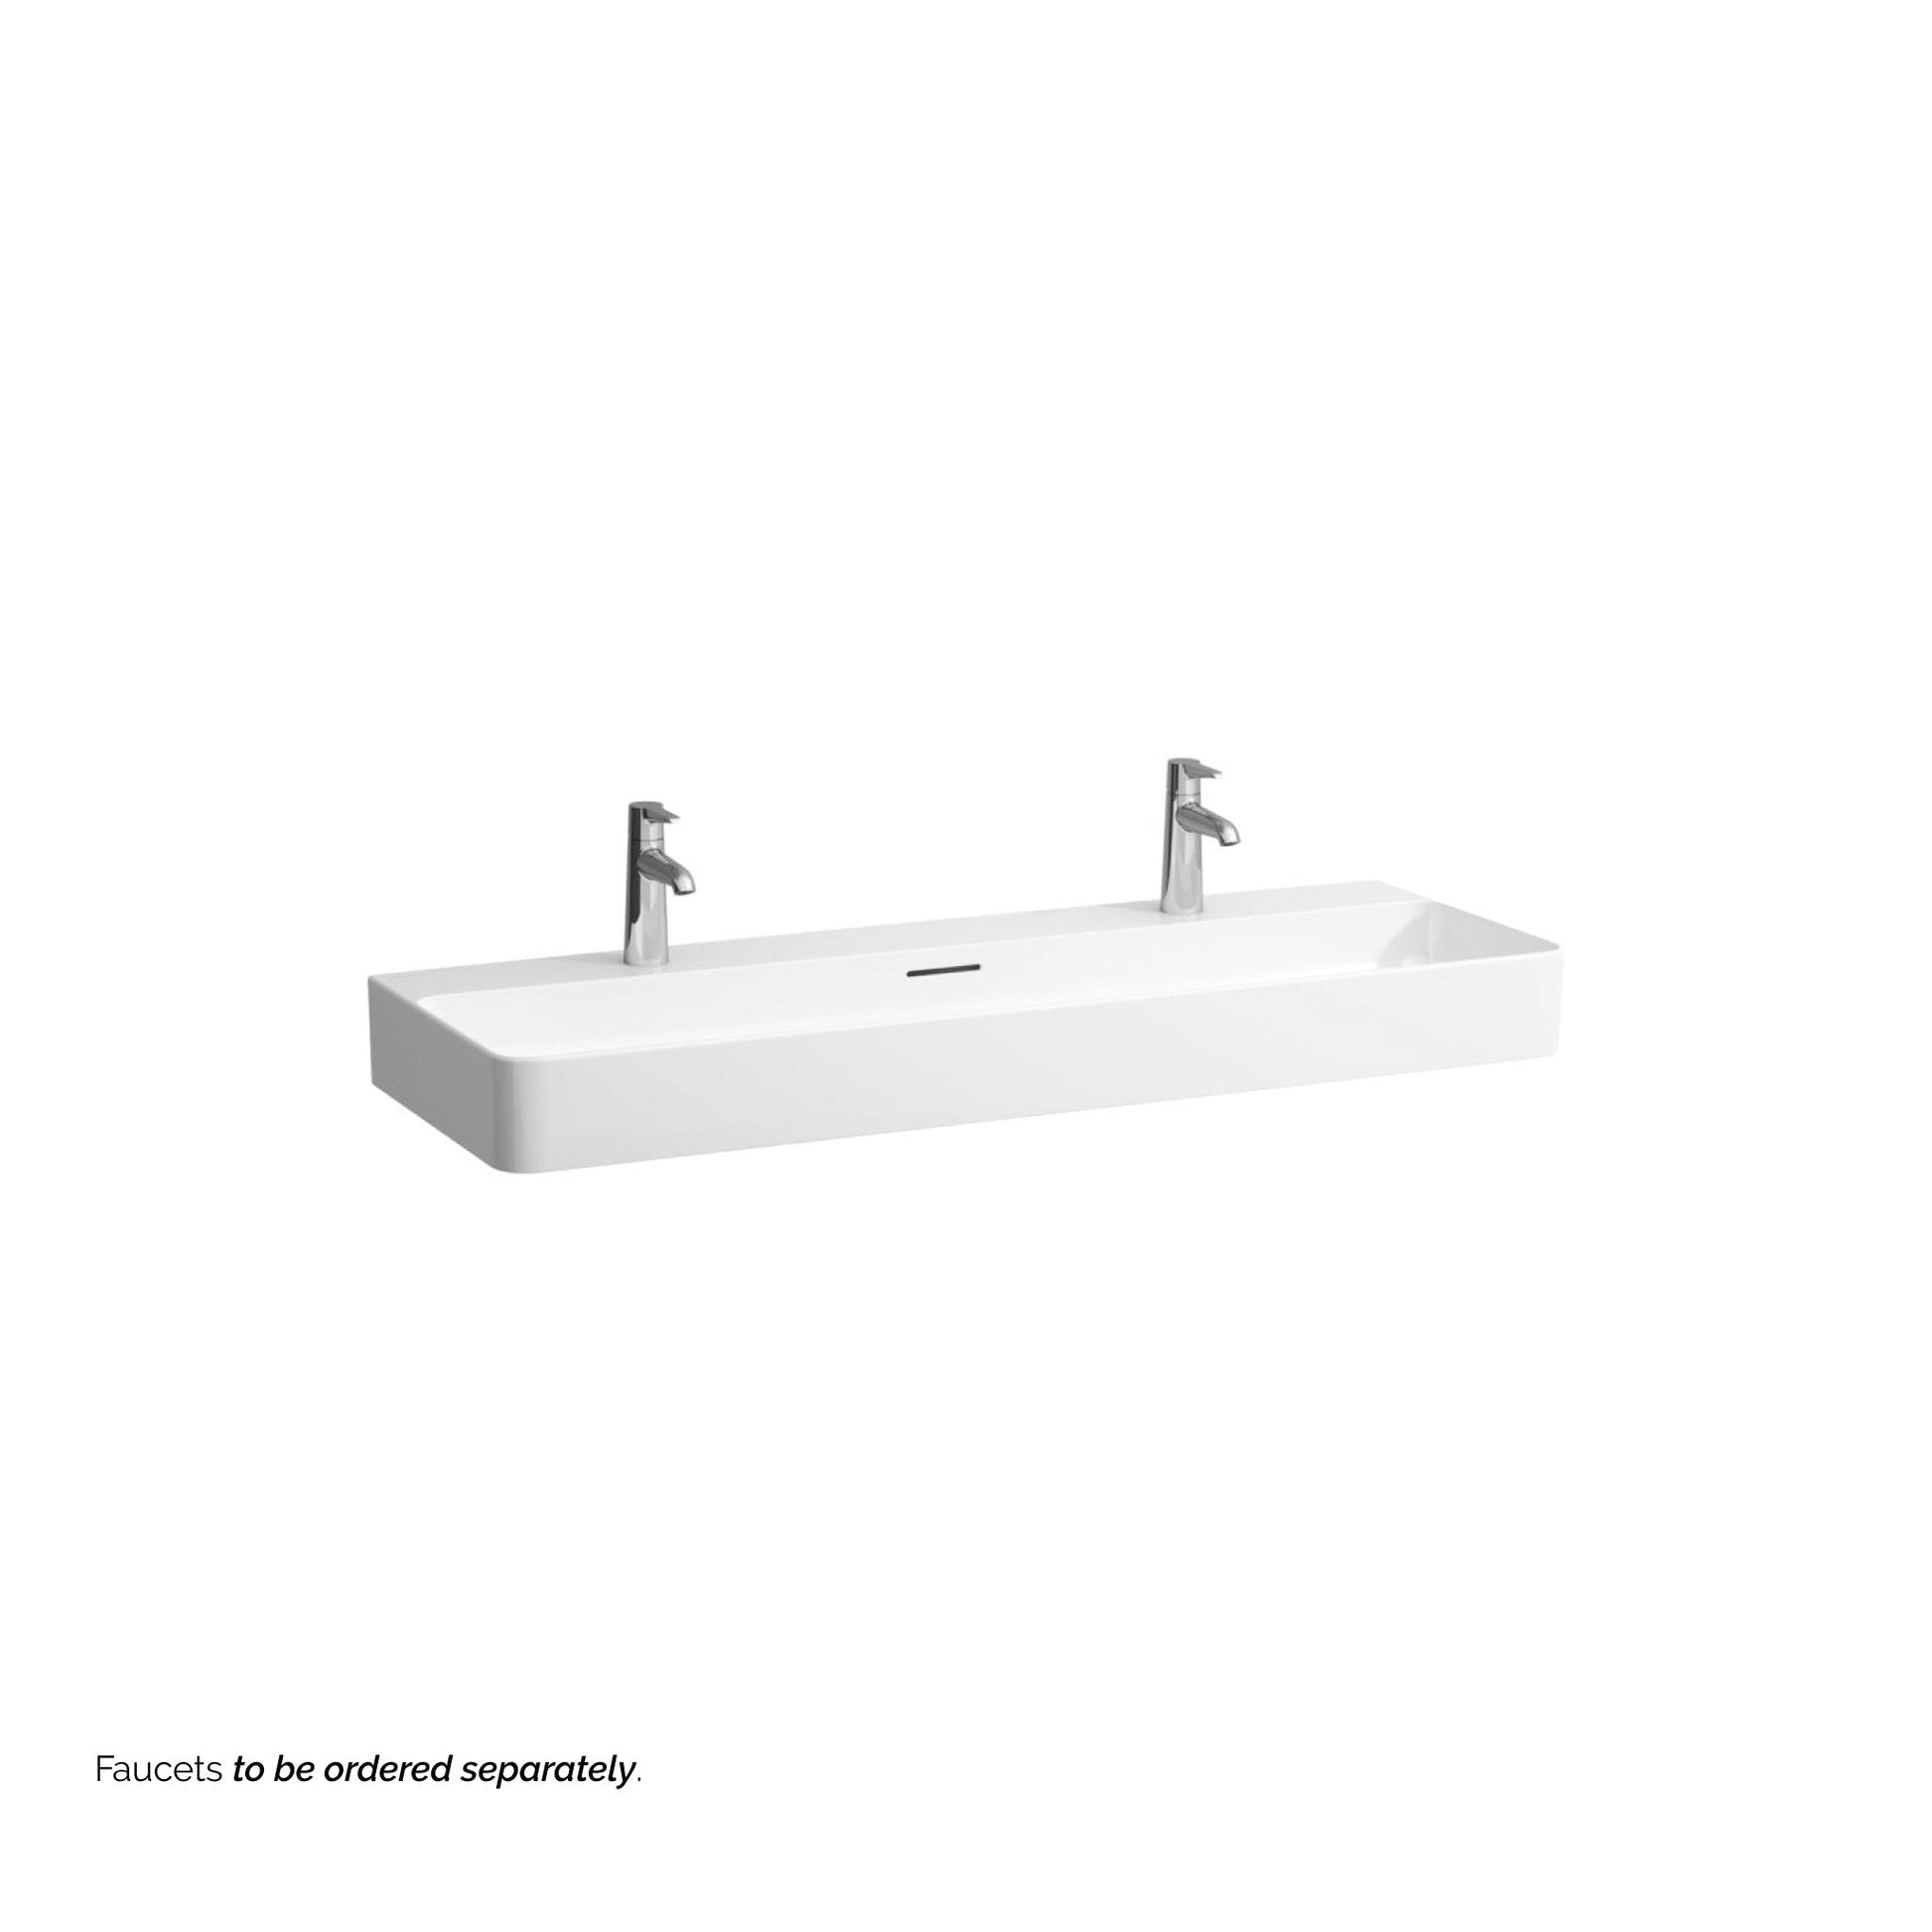 Laufen Val 47" x 17" Matte White Ceramic Wall-Mounted Trough Bathroom Sink With 2 Faucet Holes